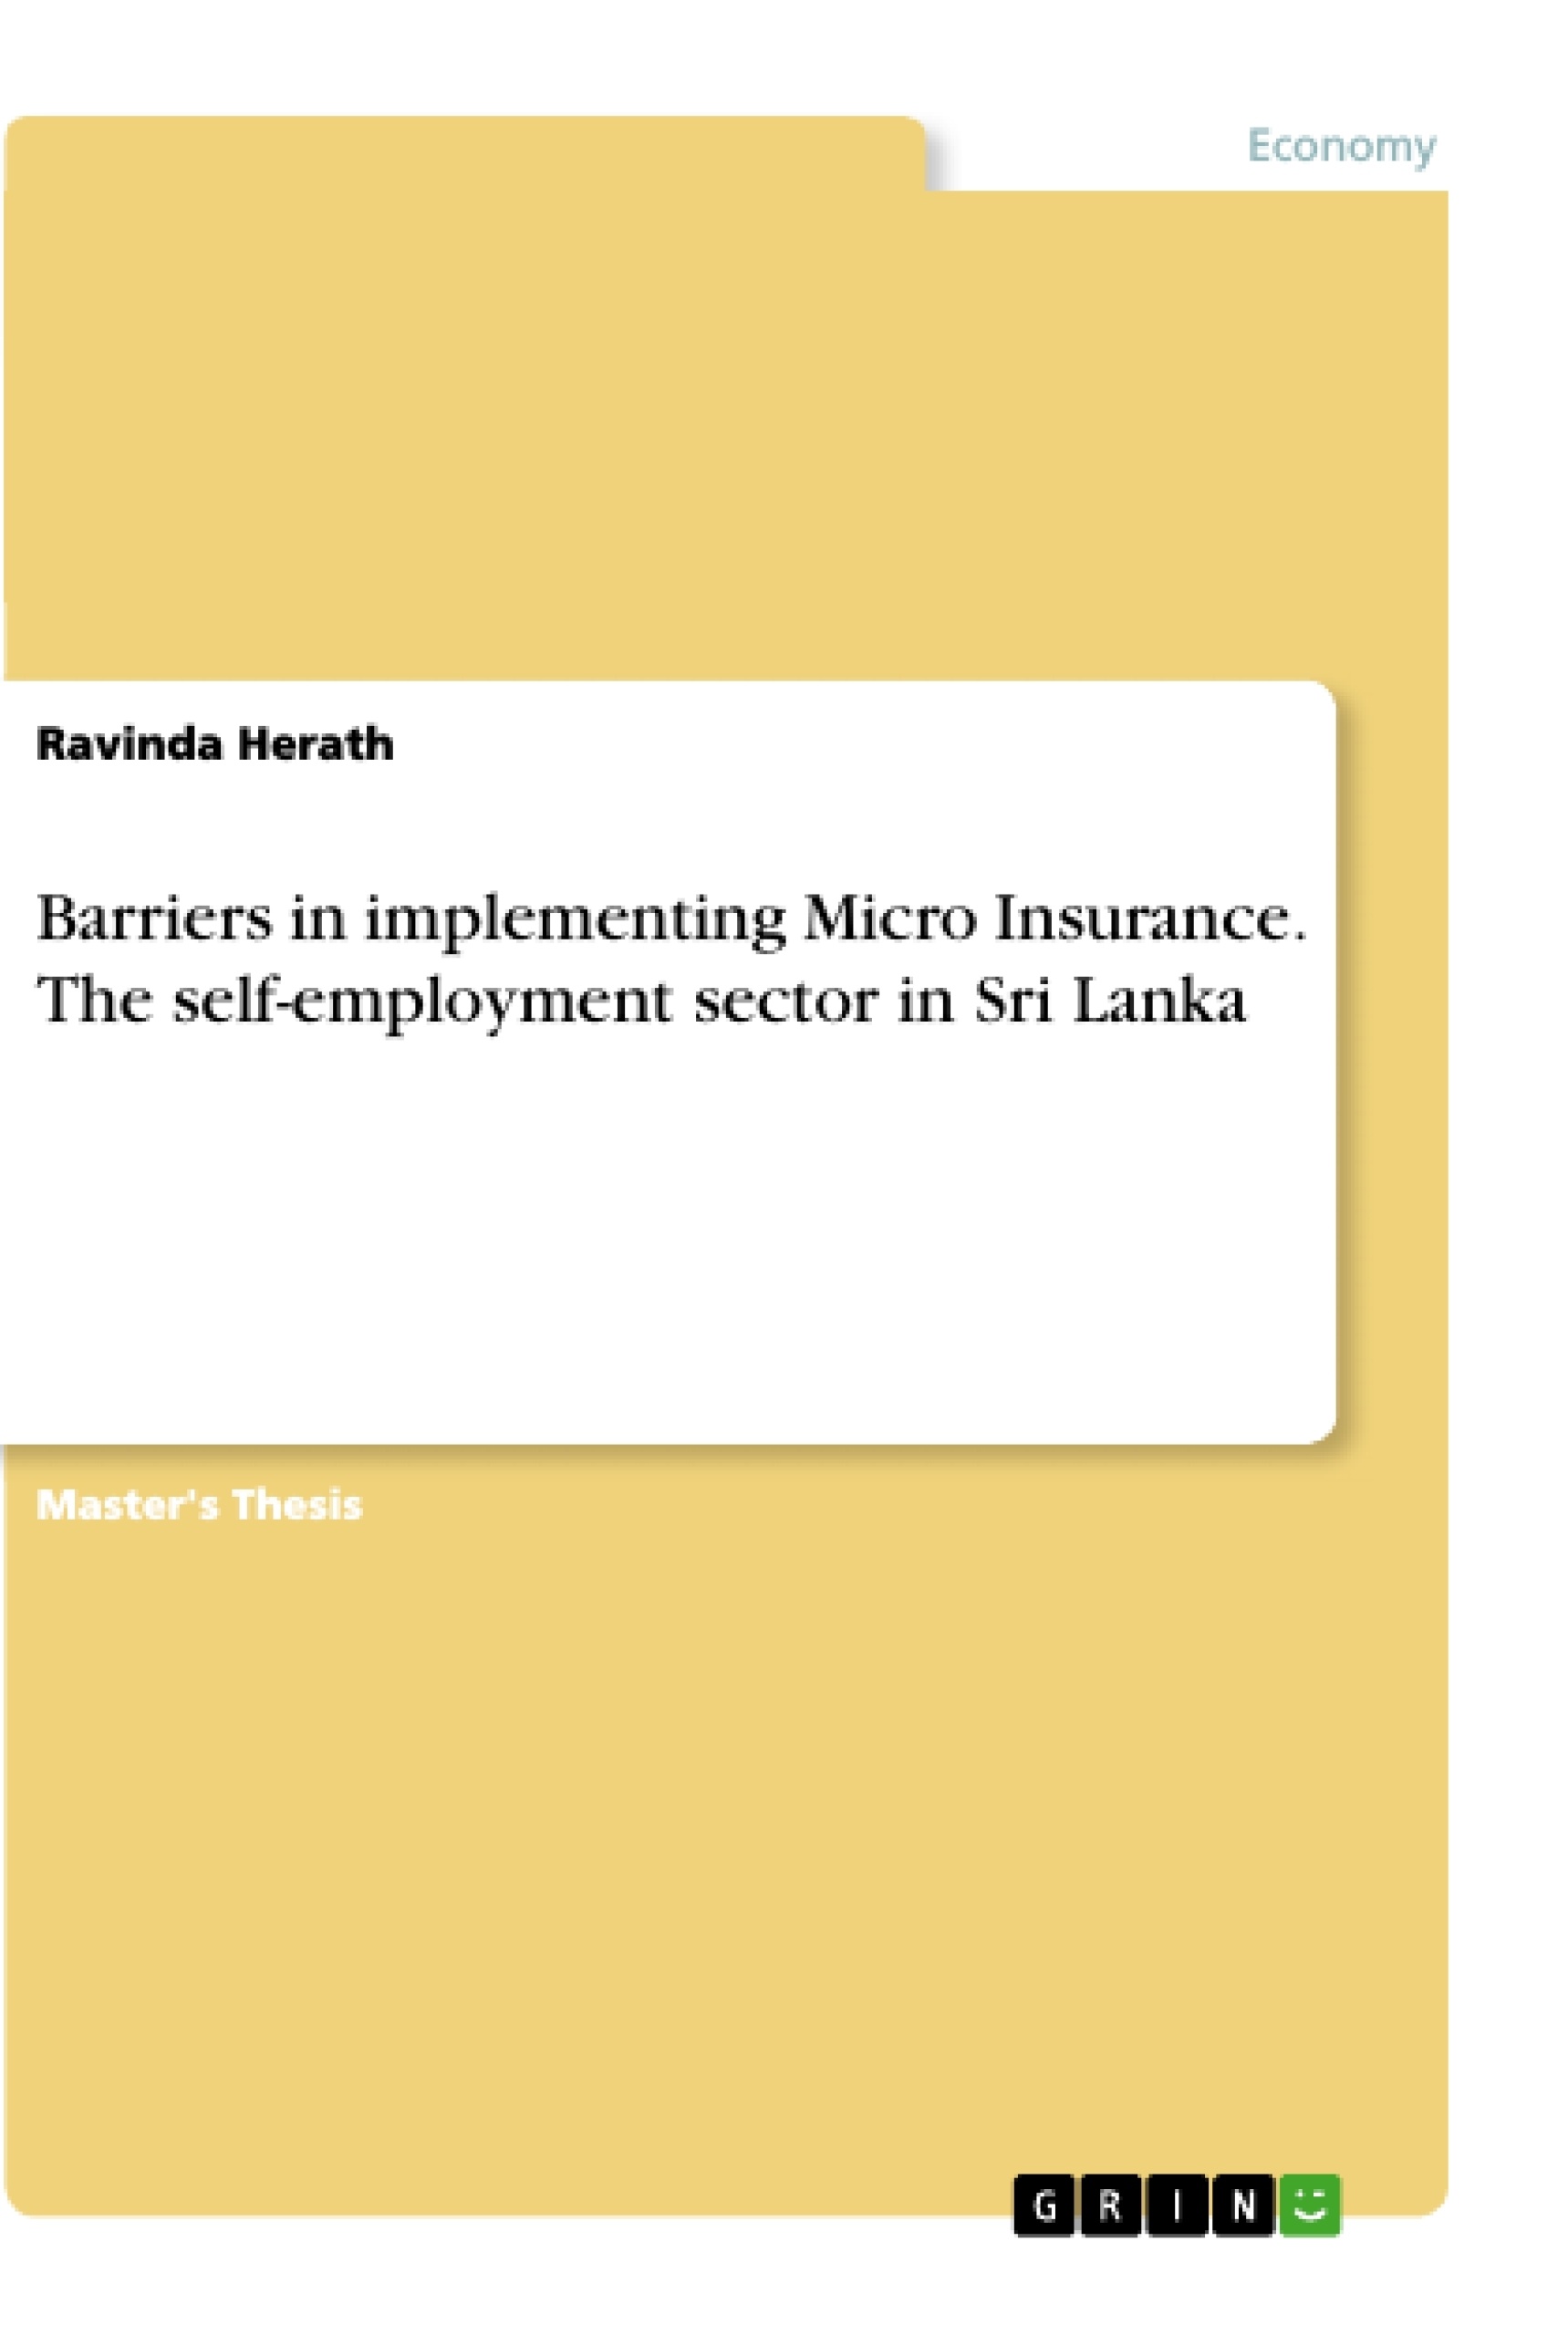 Title: Barriers in implementing Micro Insurance. The self-employment sector in Sri Lanka